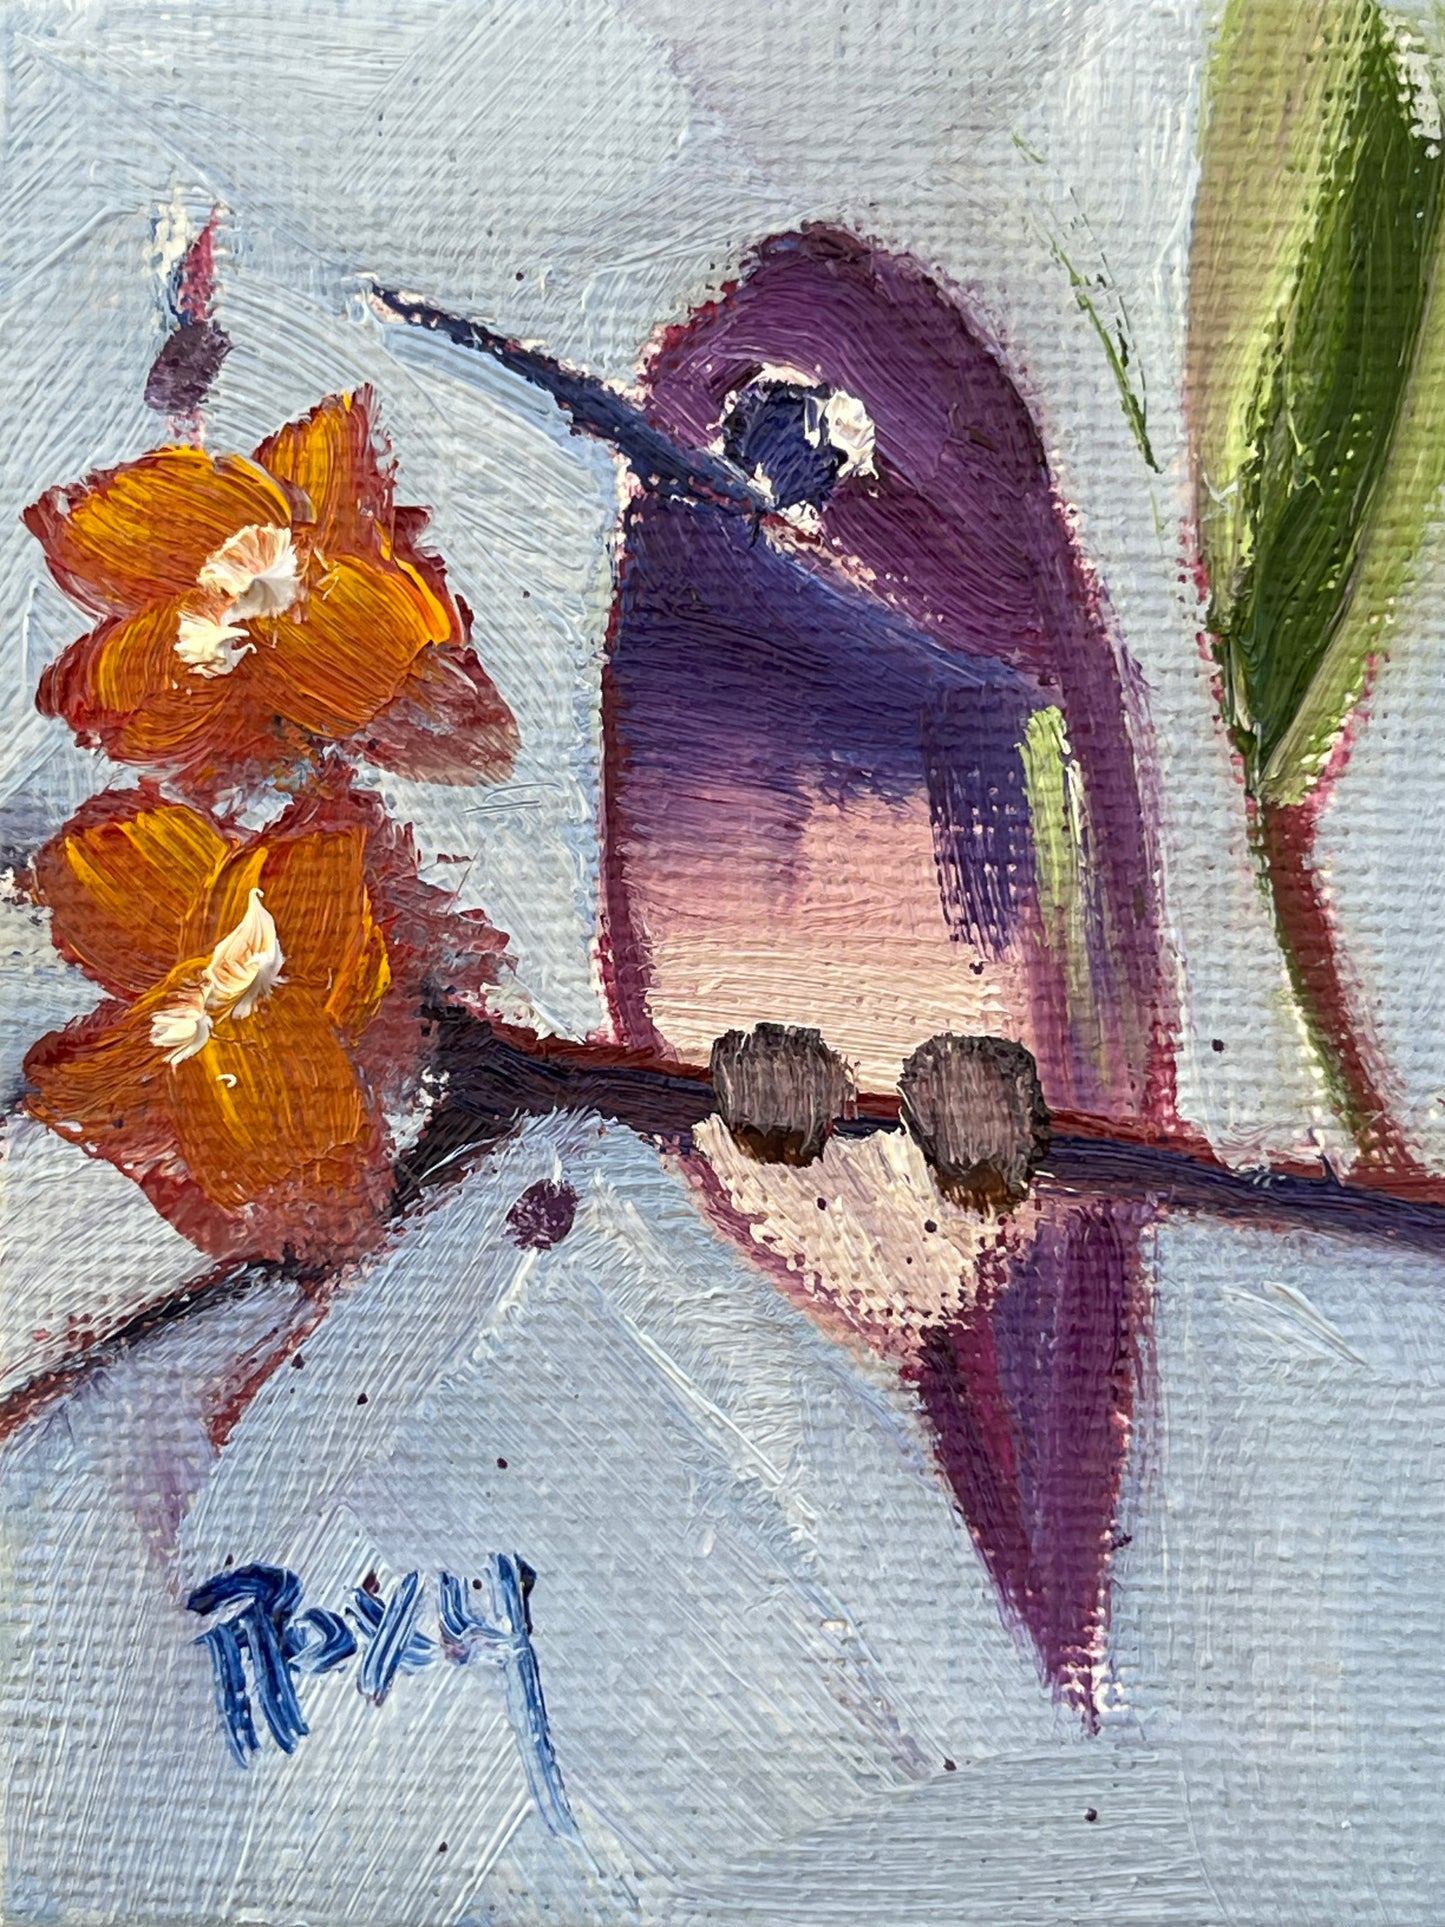 Violet Hummingbird -Original Miniature Oil Painting with Stand